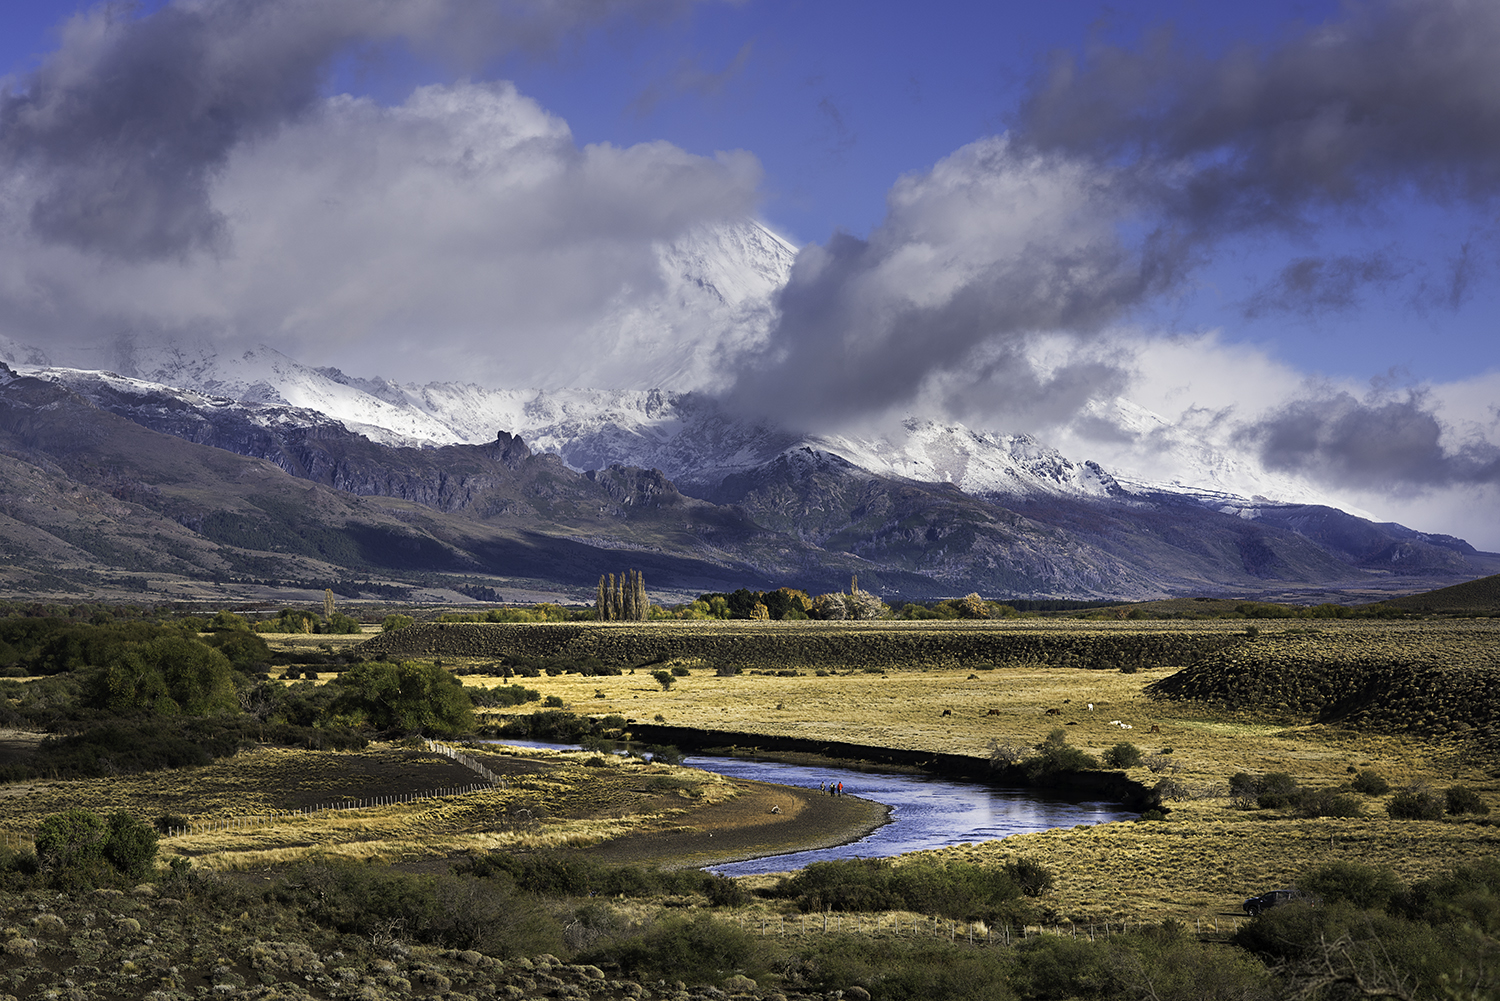 Malleo River and Lanin. Argentina